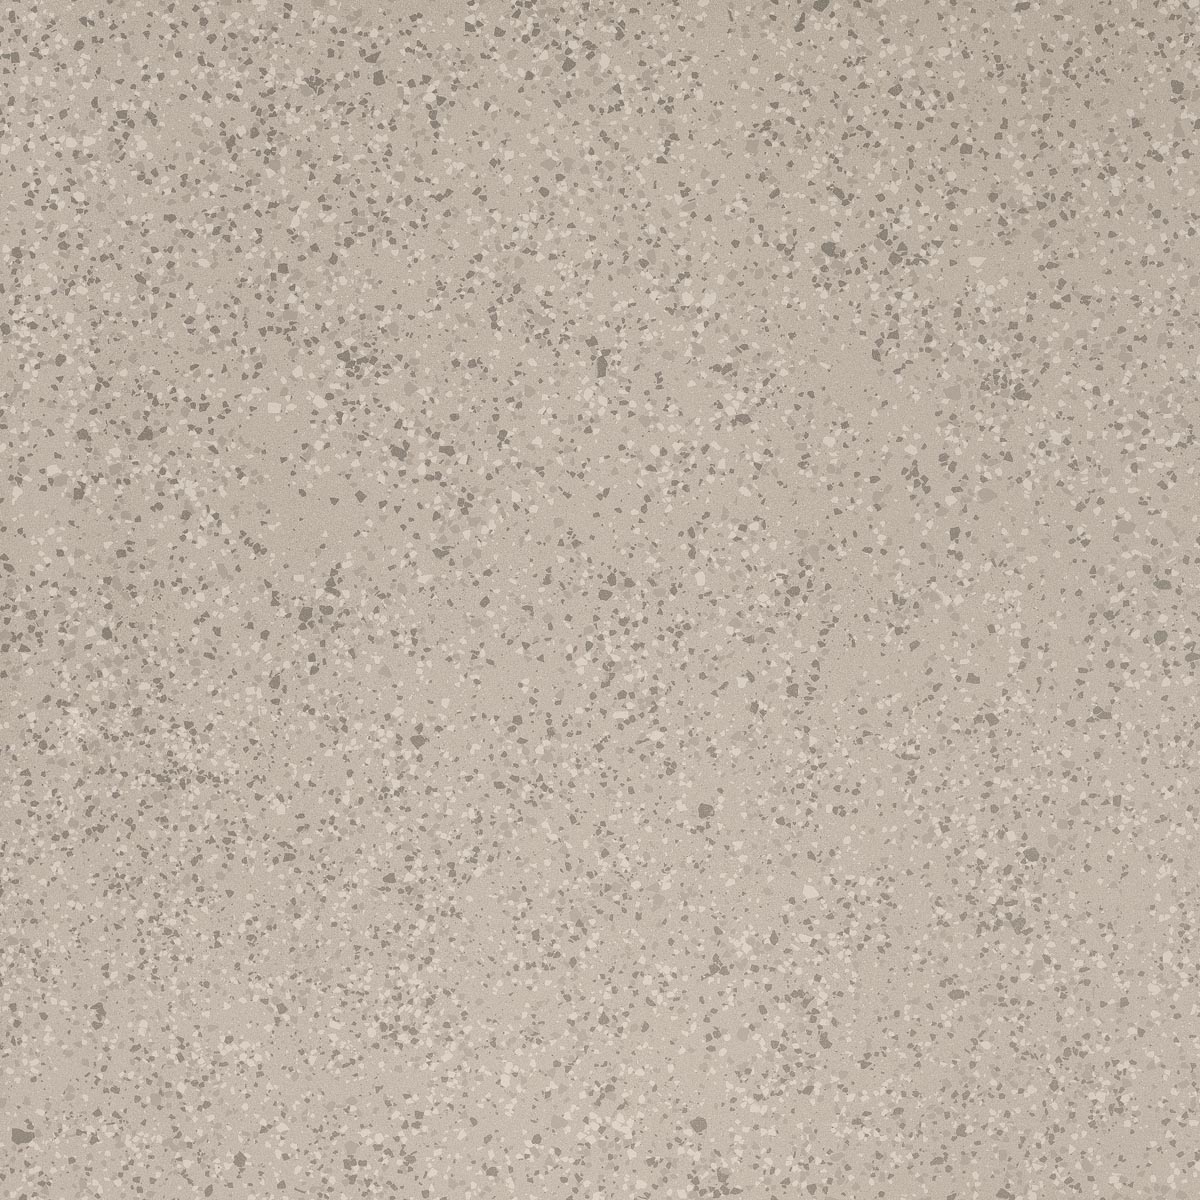 Imola Parade Argento Natural Flat Matt Outdoor 166101 120x120cm rectified 10,5mm - PRDE RB120AG RM